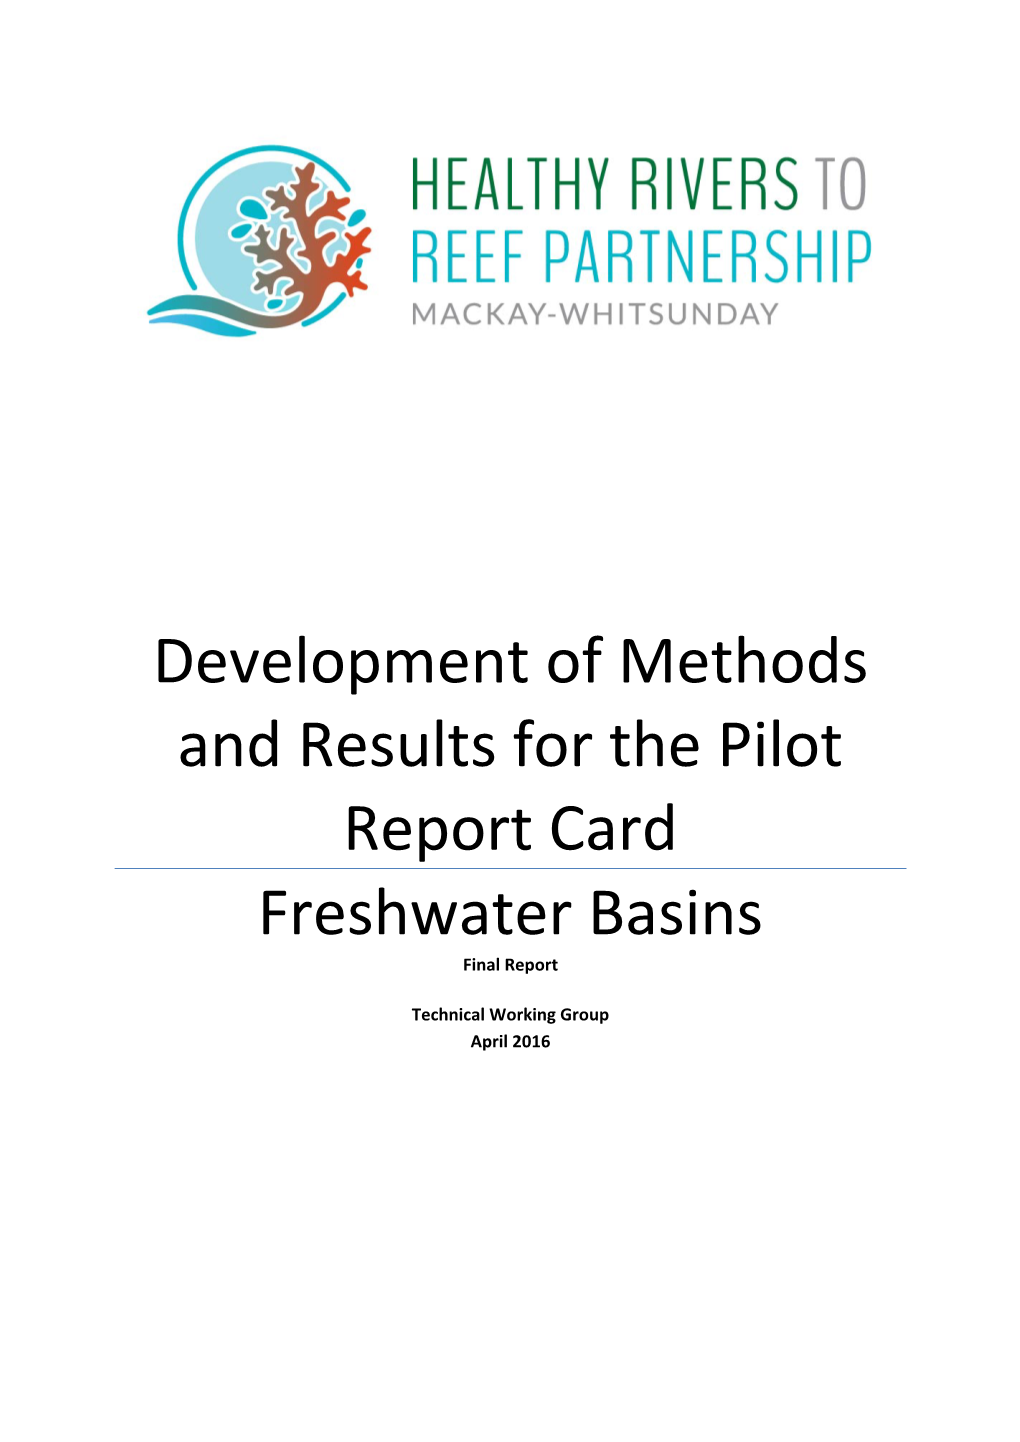 Development of Methods and Results for the Pilot Report Card Freshwater Basins Final Report